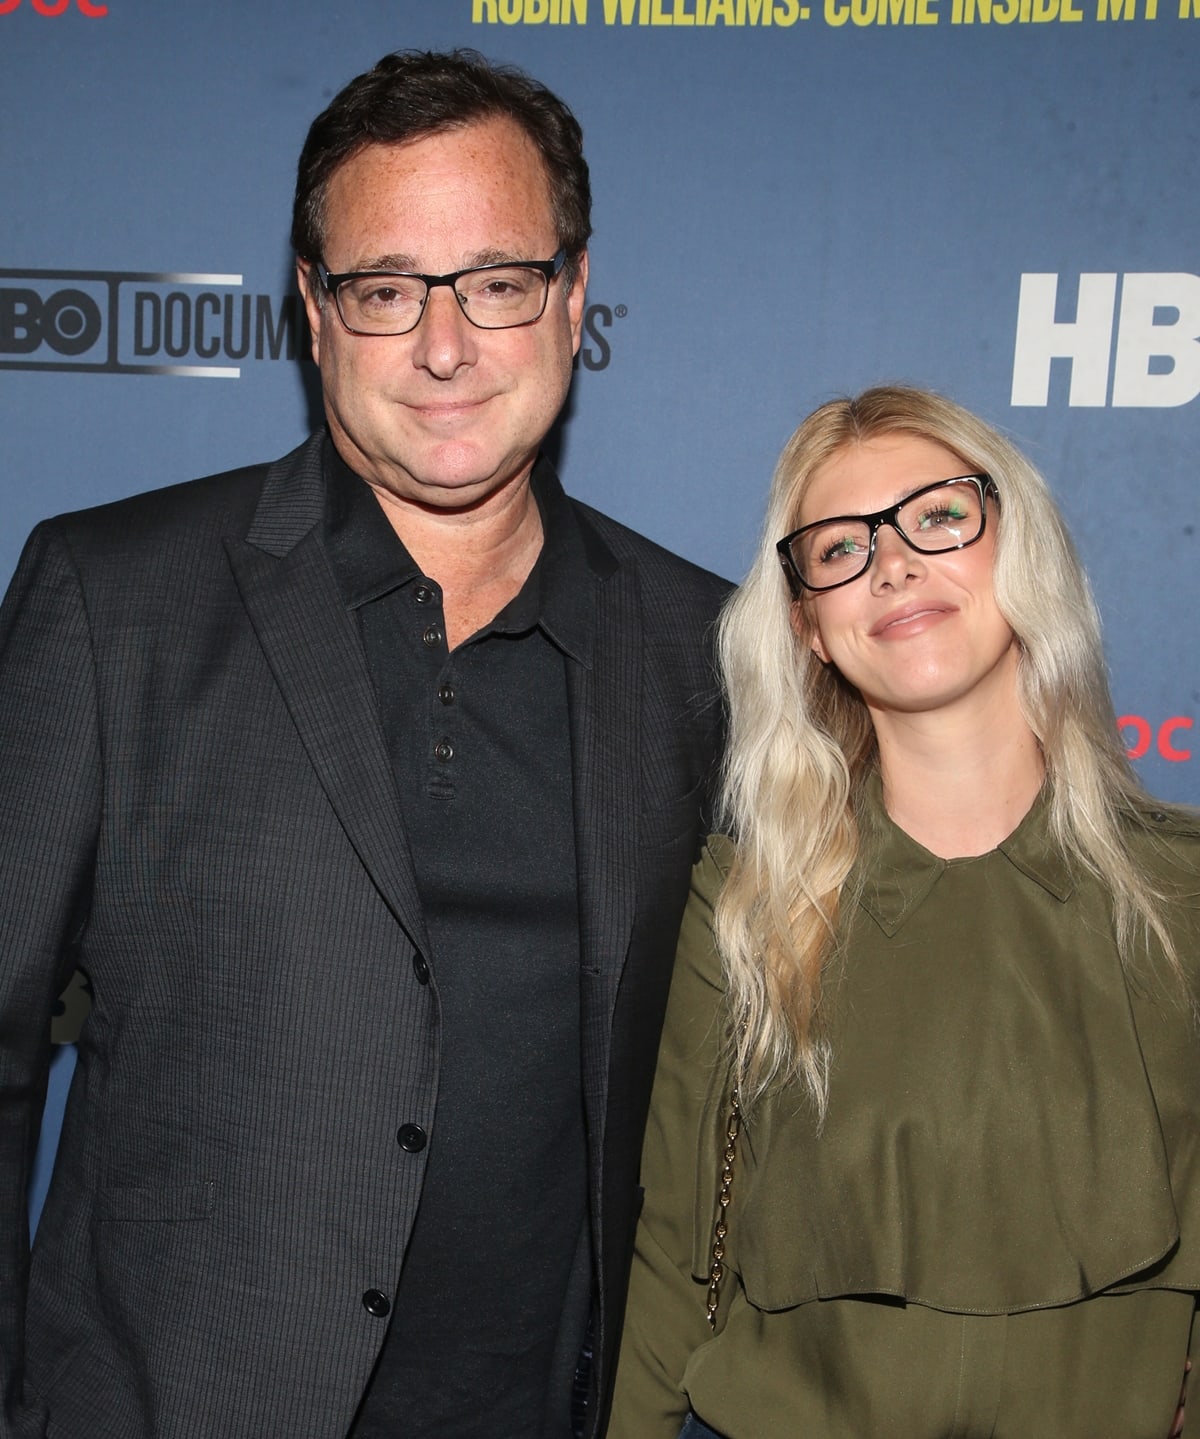 Bob Saget was 23 years older than his wife Kelly Rizzo, whom he met in early 2015 through a mutual friend